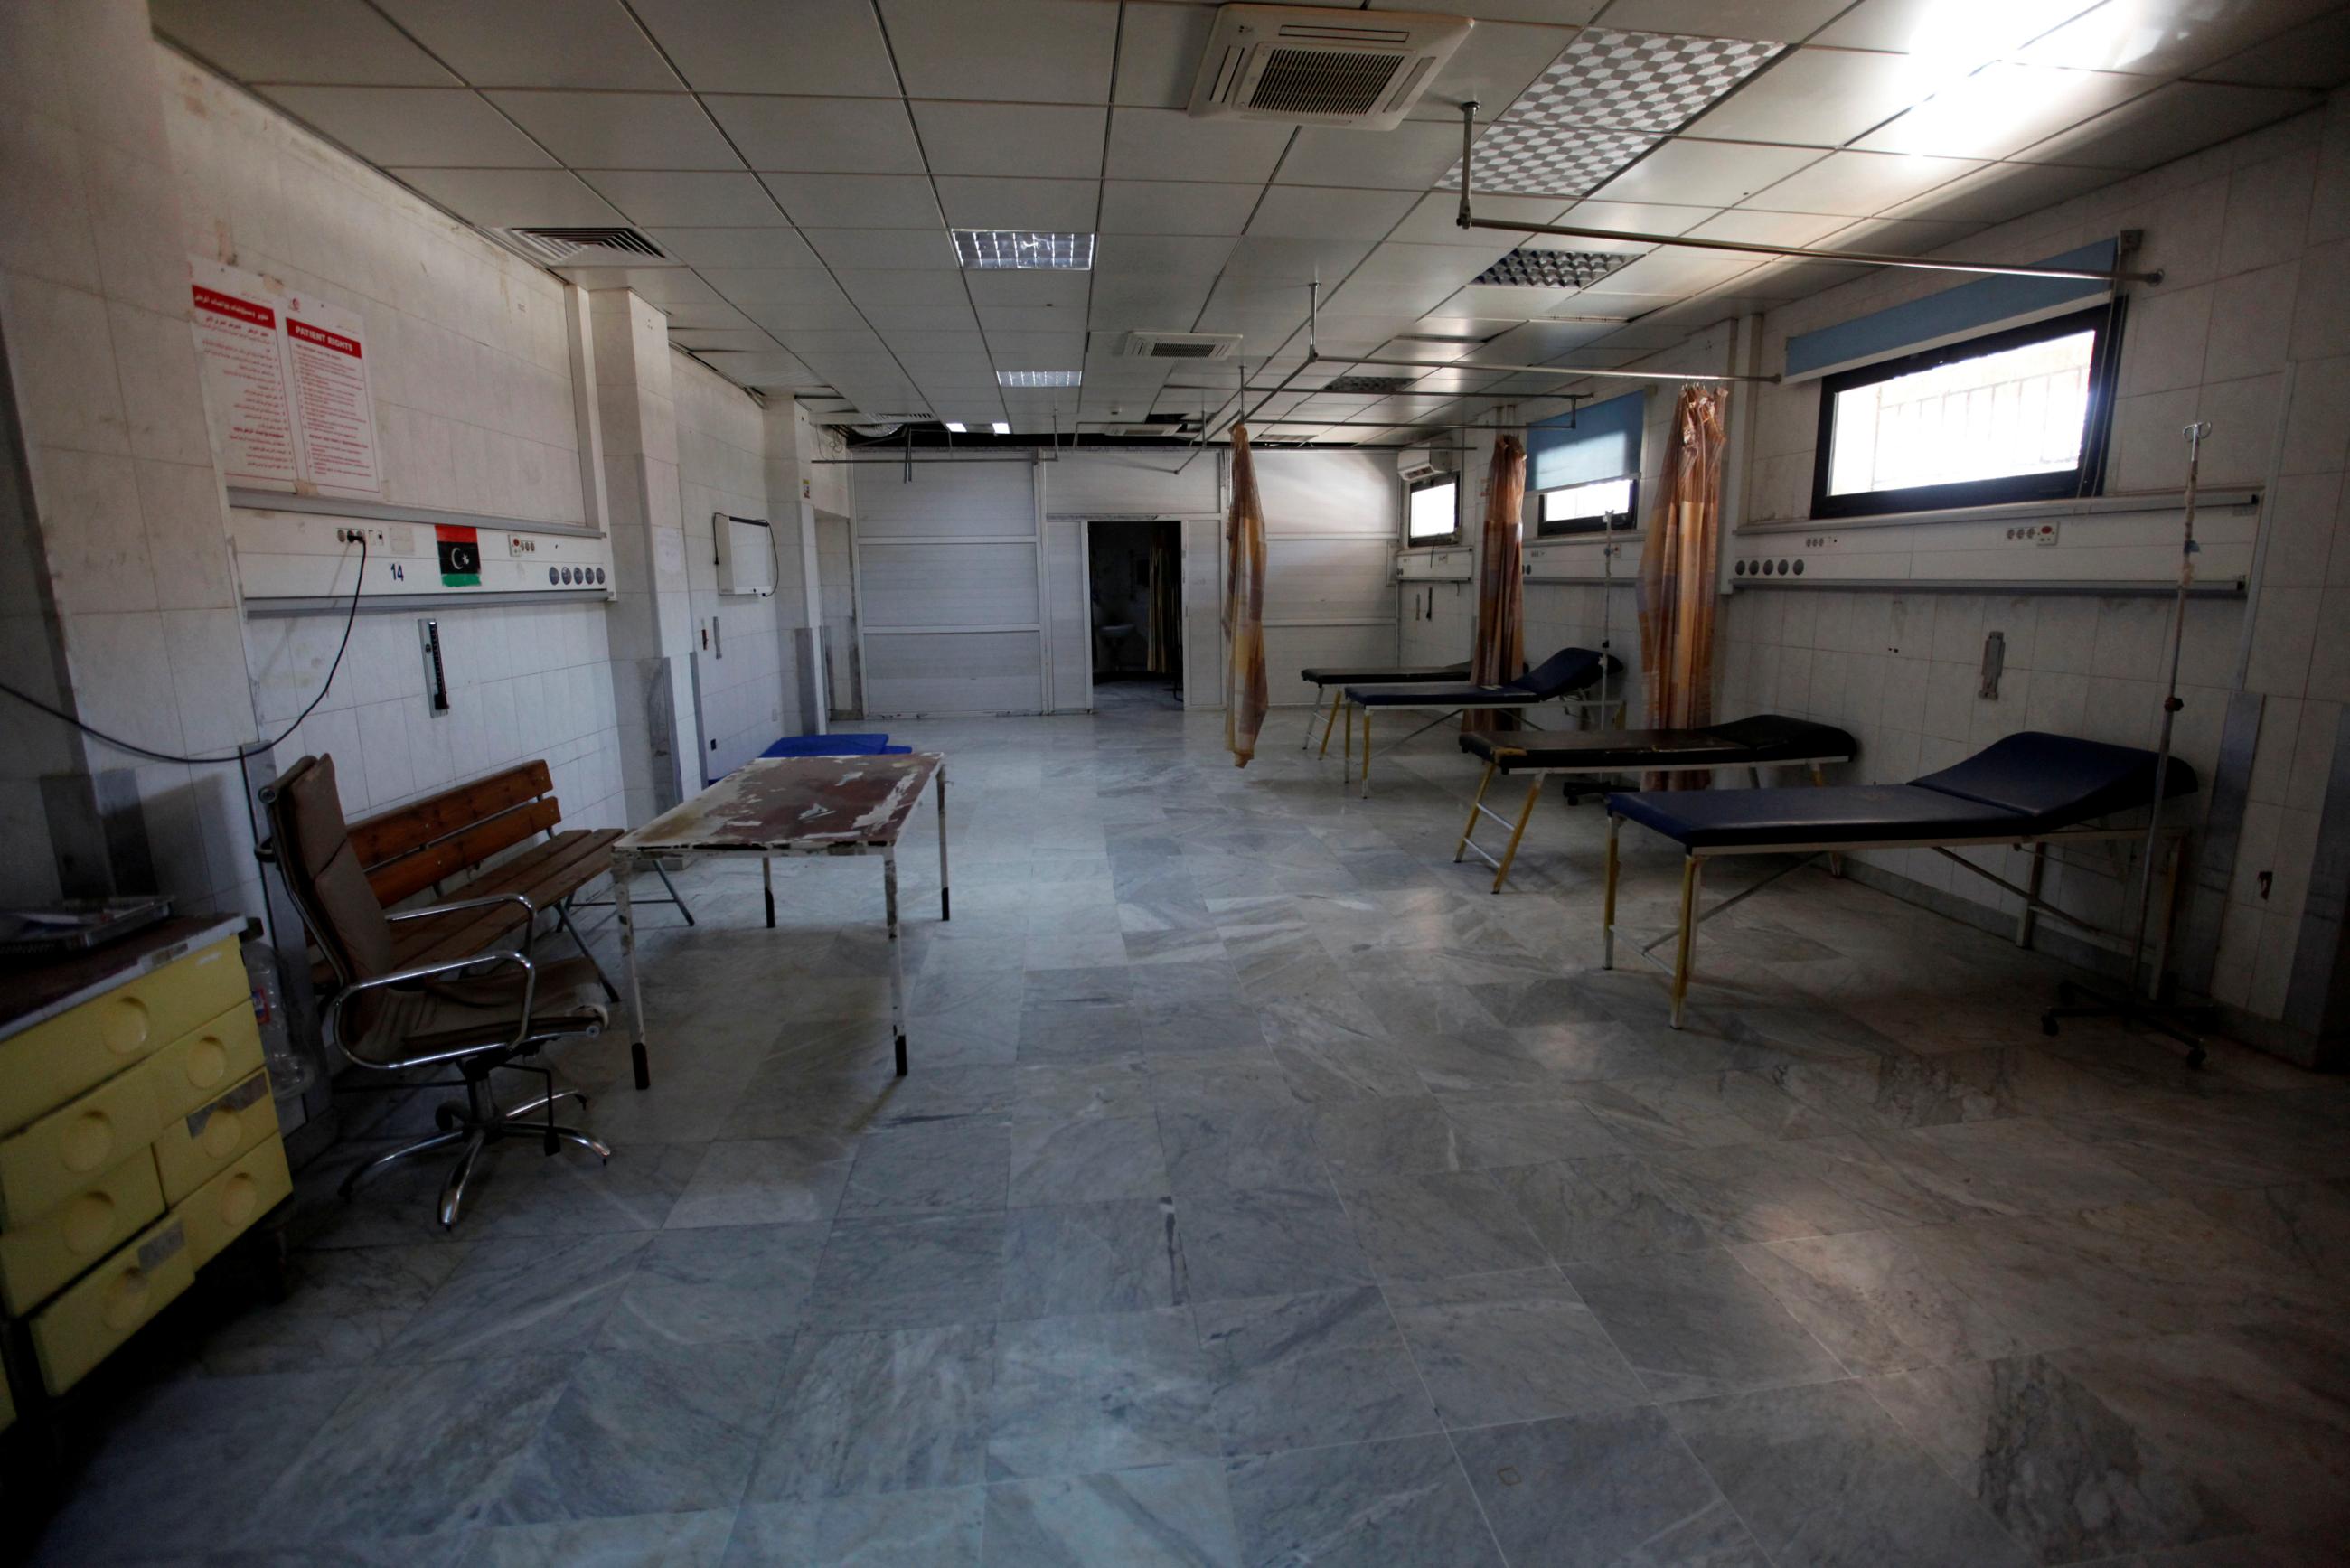 A view shows the closed emergency room 